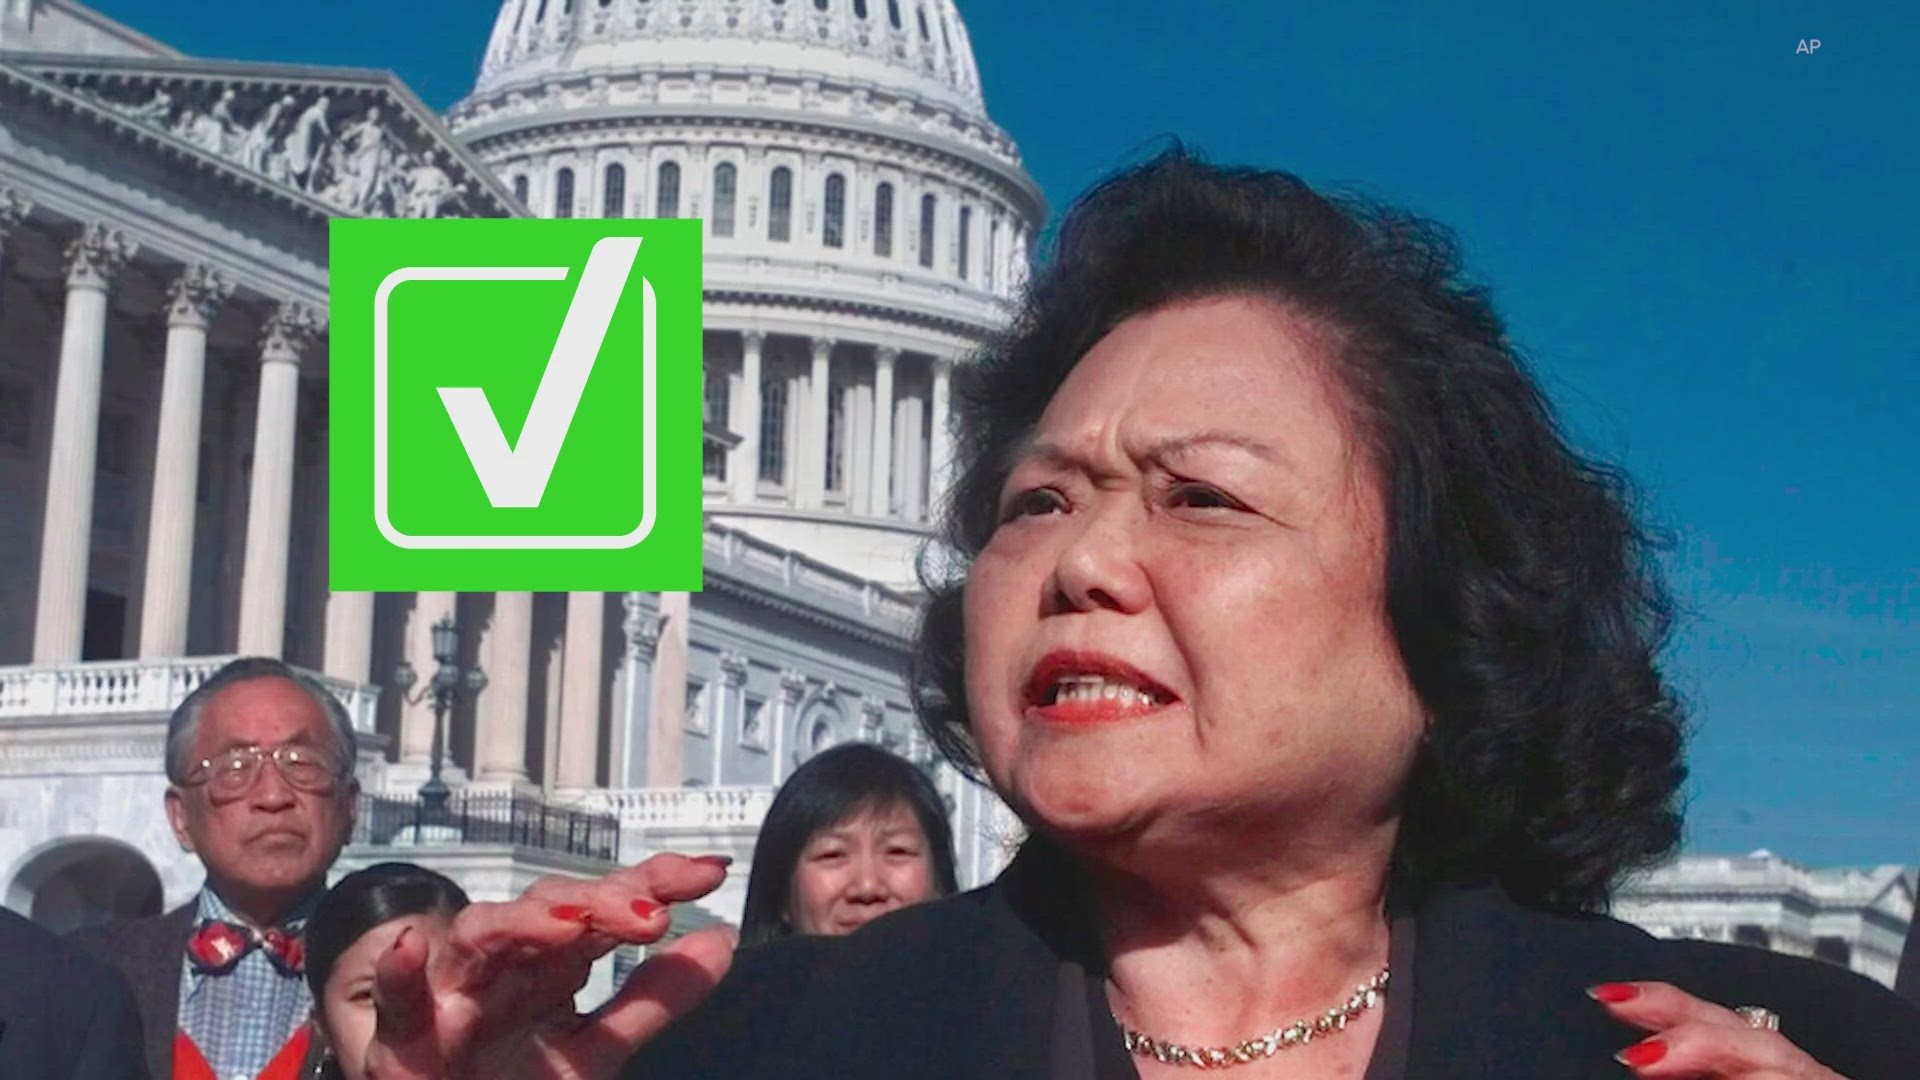 Rep. Patsy Mink is often remembered as an advocate for women’s rights, co-authoring and sponsoring the landmark Title IX law.